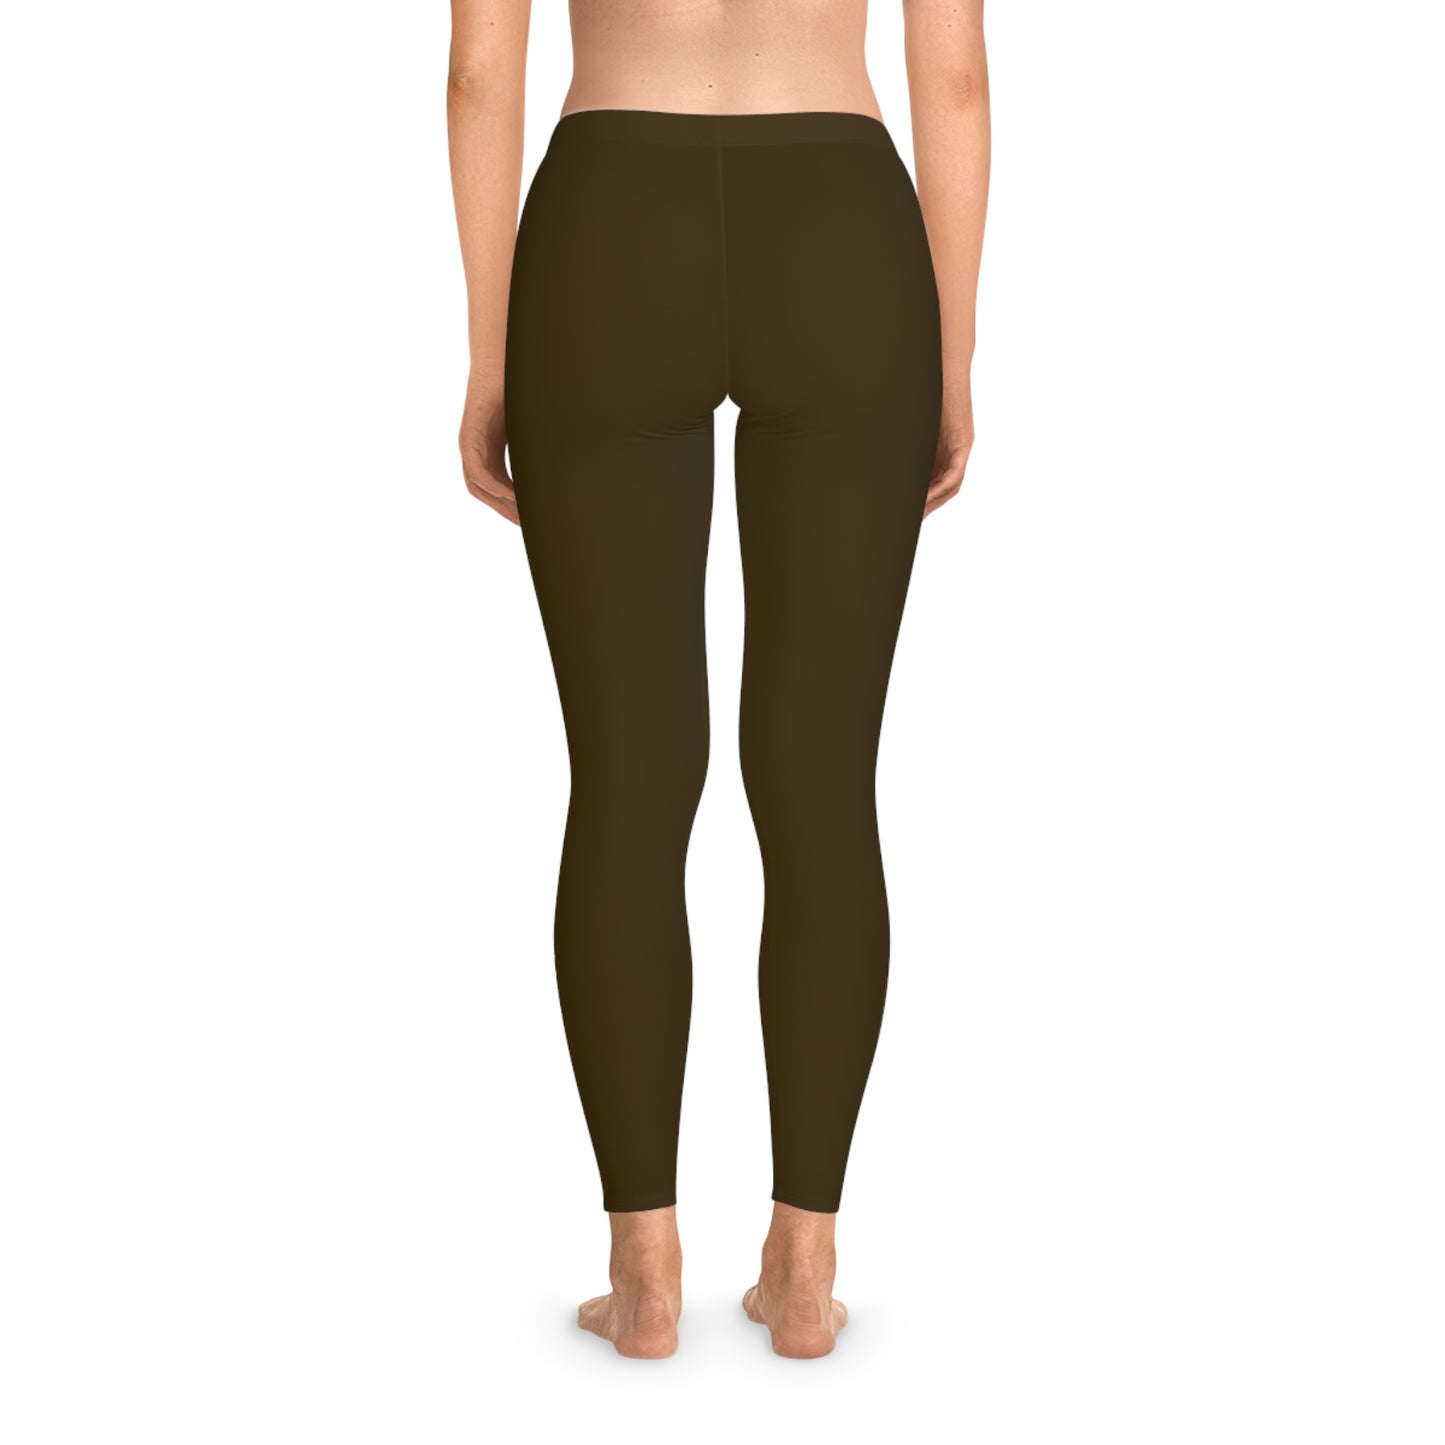 Earthy Brown - Unisex Tights